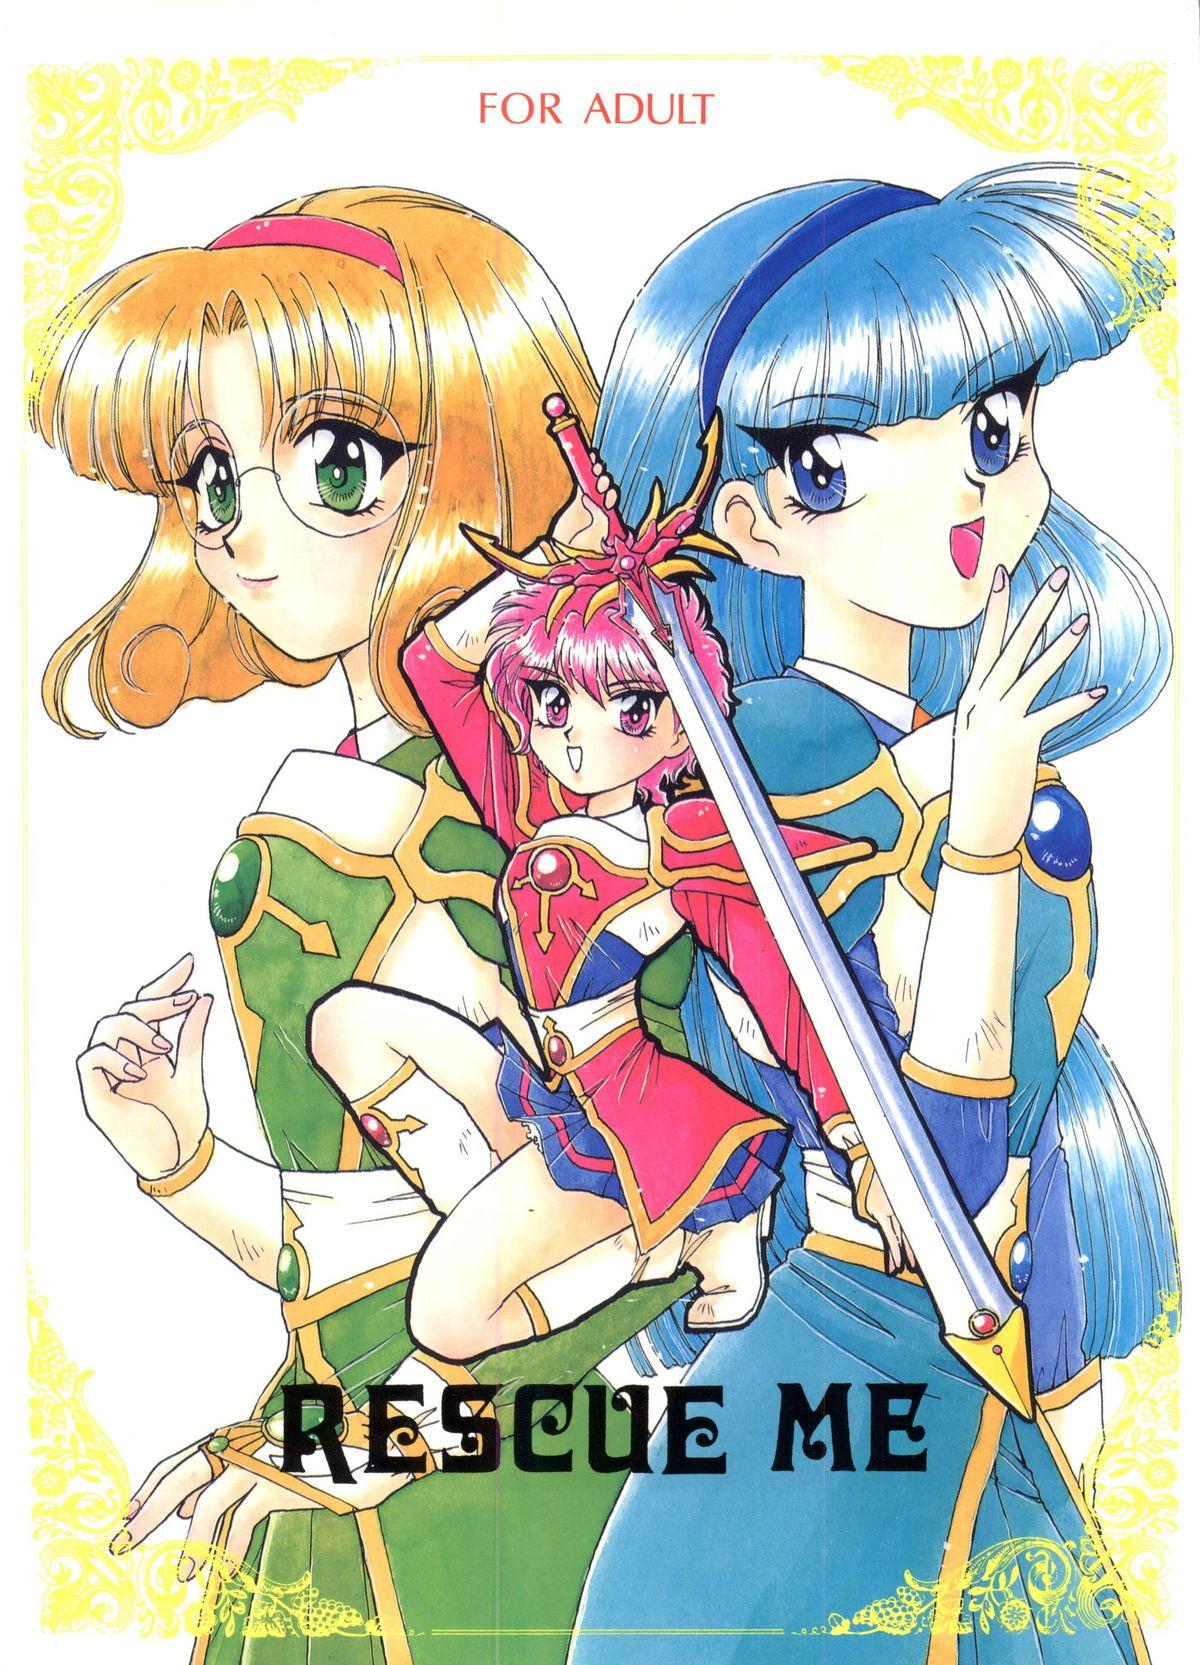 Real Amature Porn Rescue Me - Magic knight rayearth Tinder - Picture 1